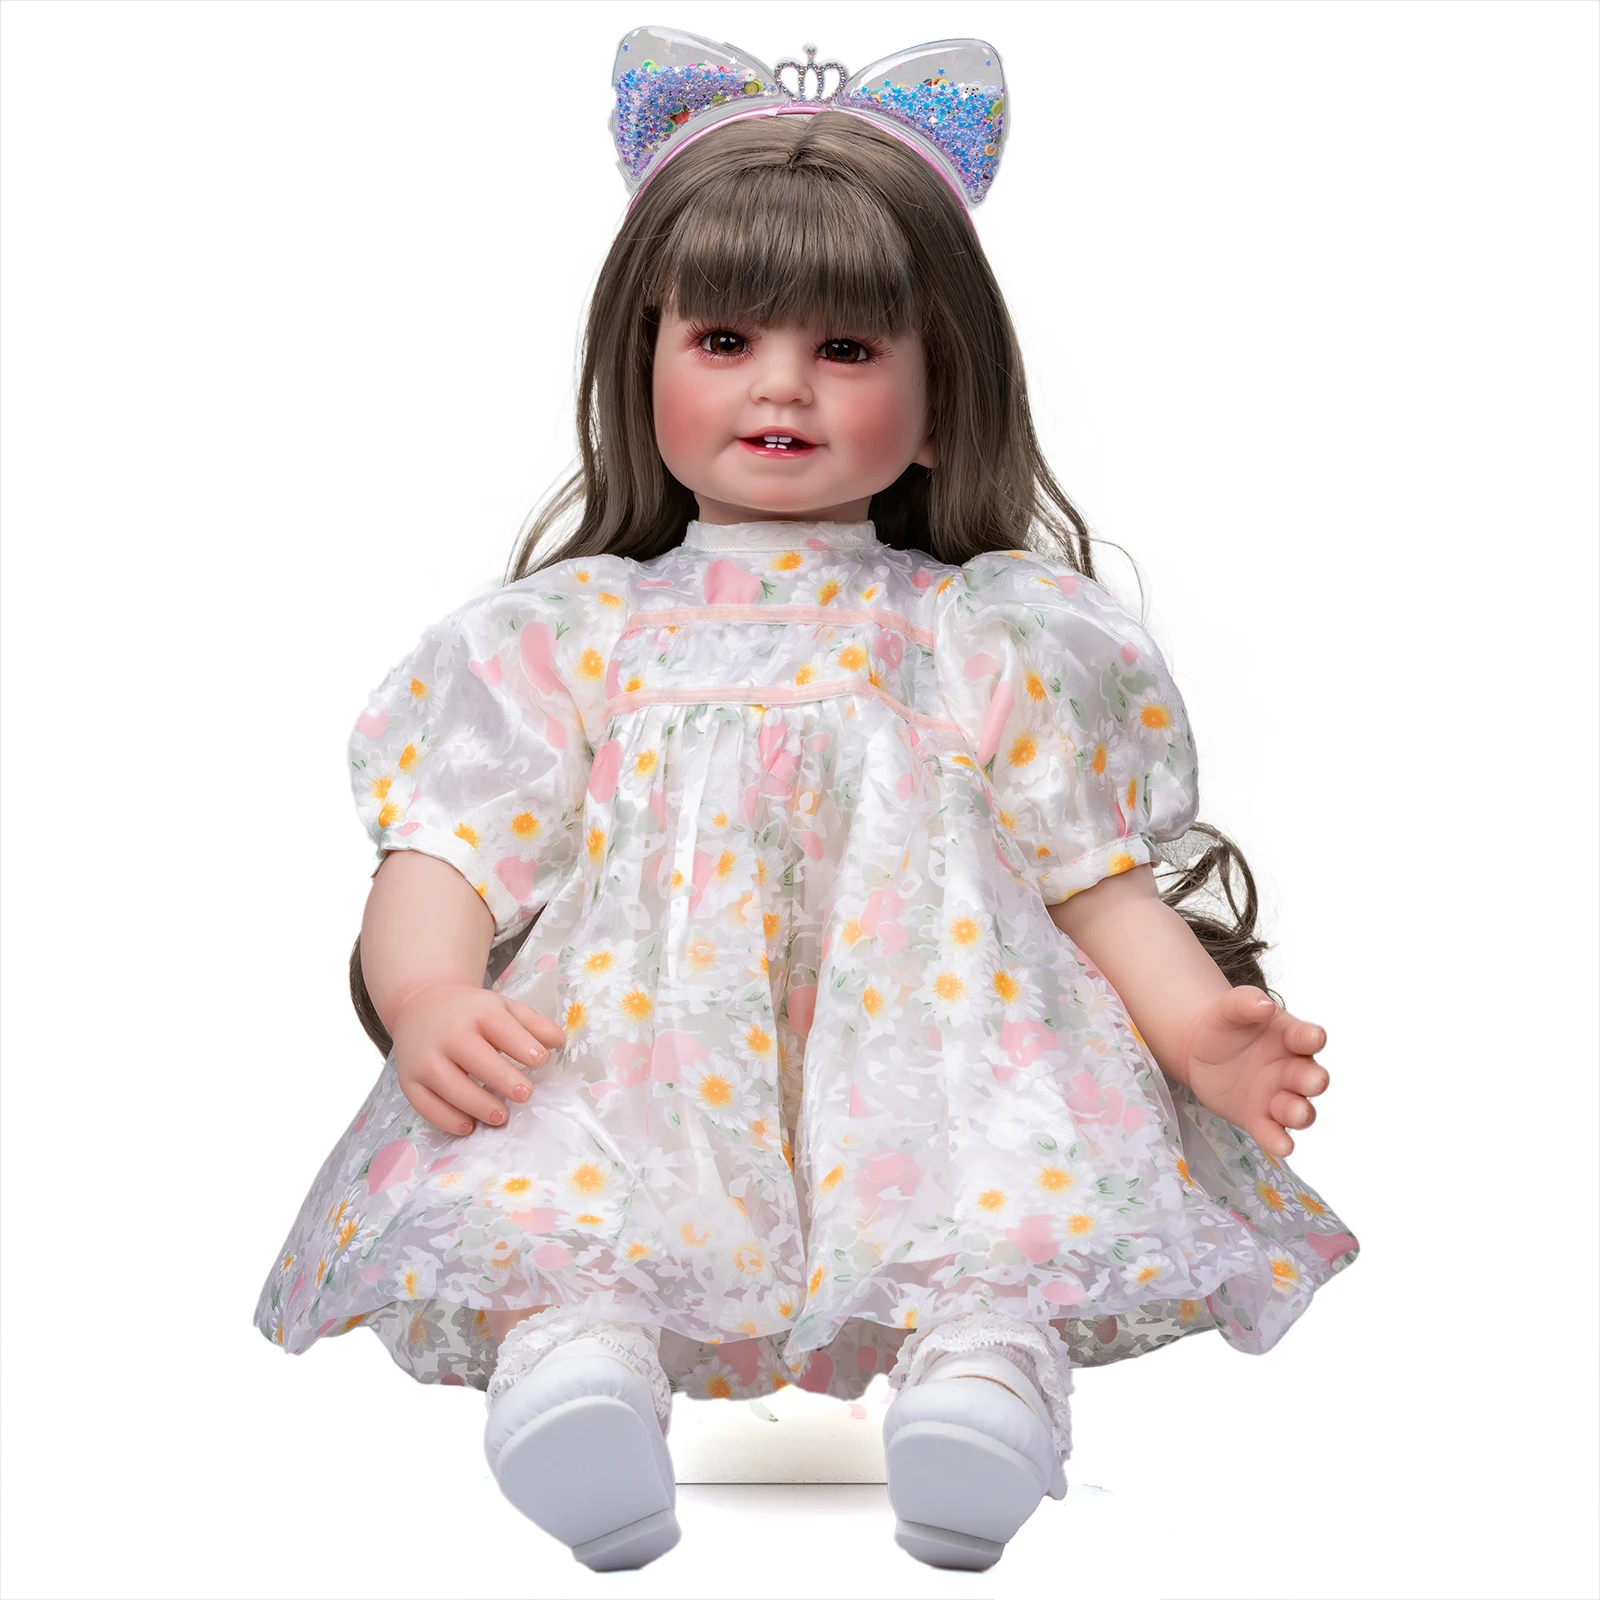 

New 60cm Reborn Dolls Silicone Baby Doll That Look Real Finished Painted Realistic Princess Toddler Toys For Kids Birthday Gifts